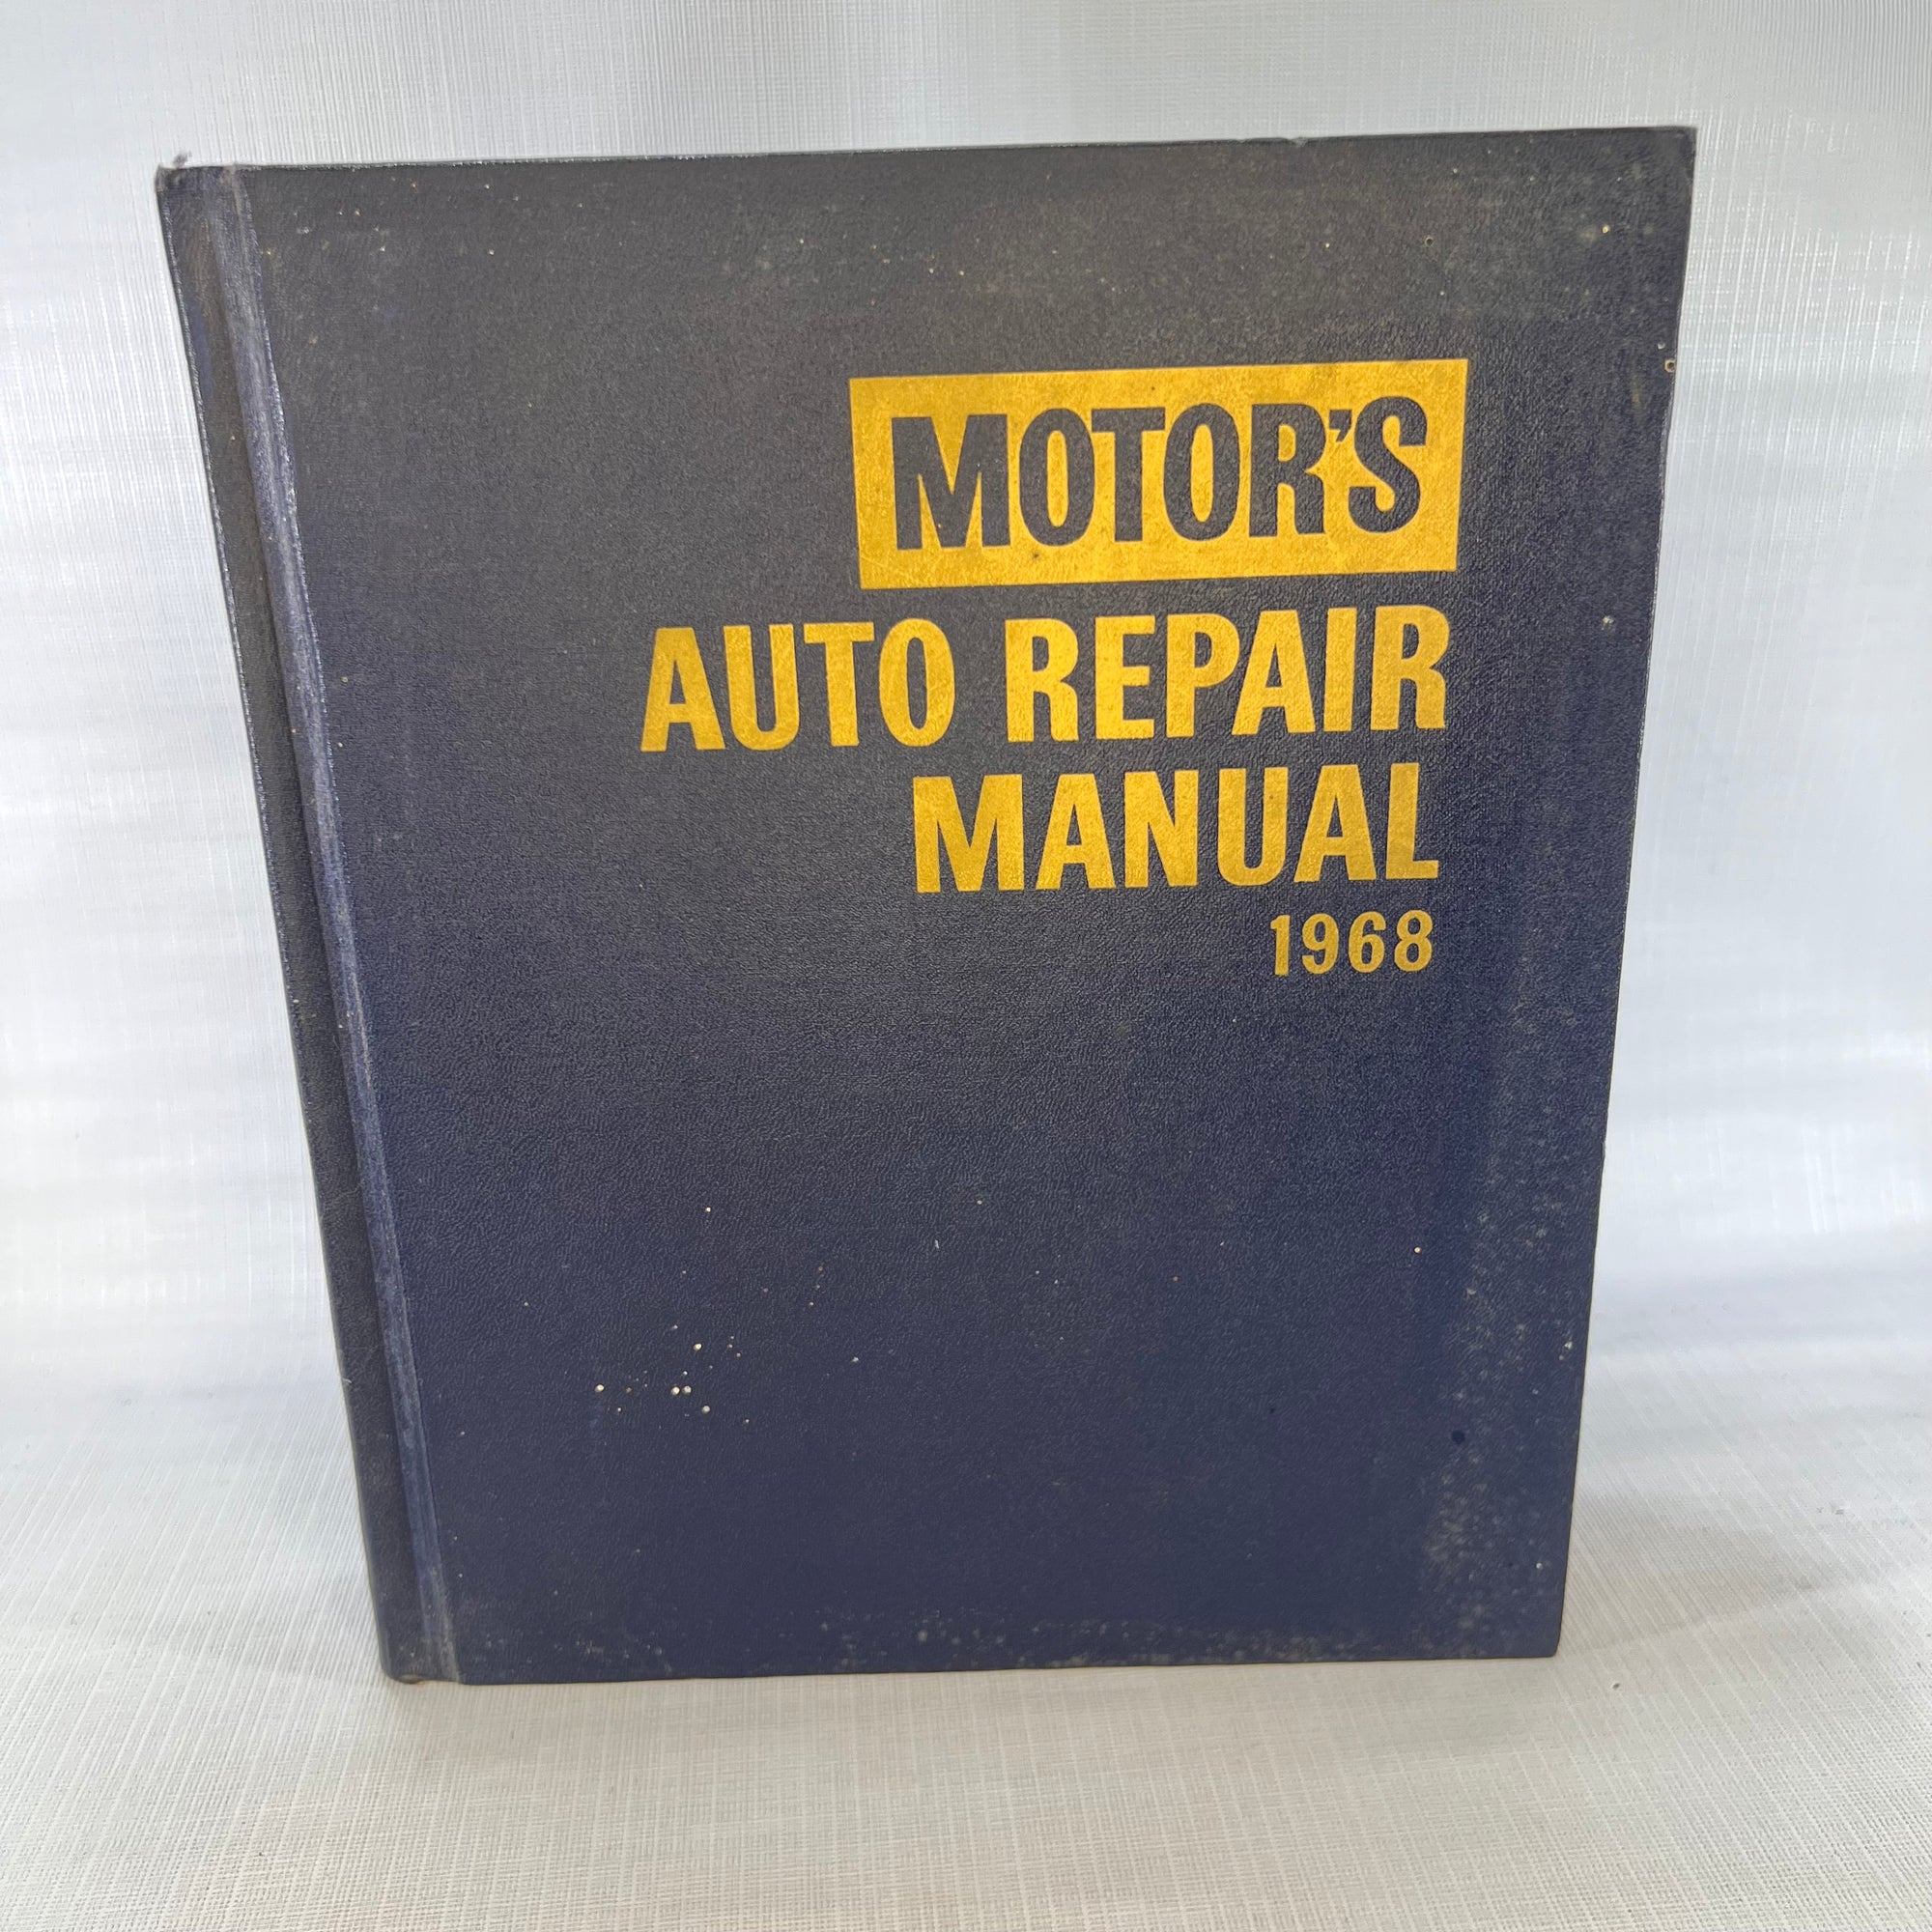 Motors Auto Repair Manual Thirty first Edition Fourth Printing 1968 Mechanical Specs and Service Procedures Hearst Corp